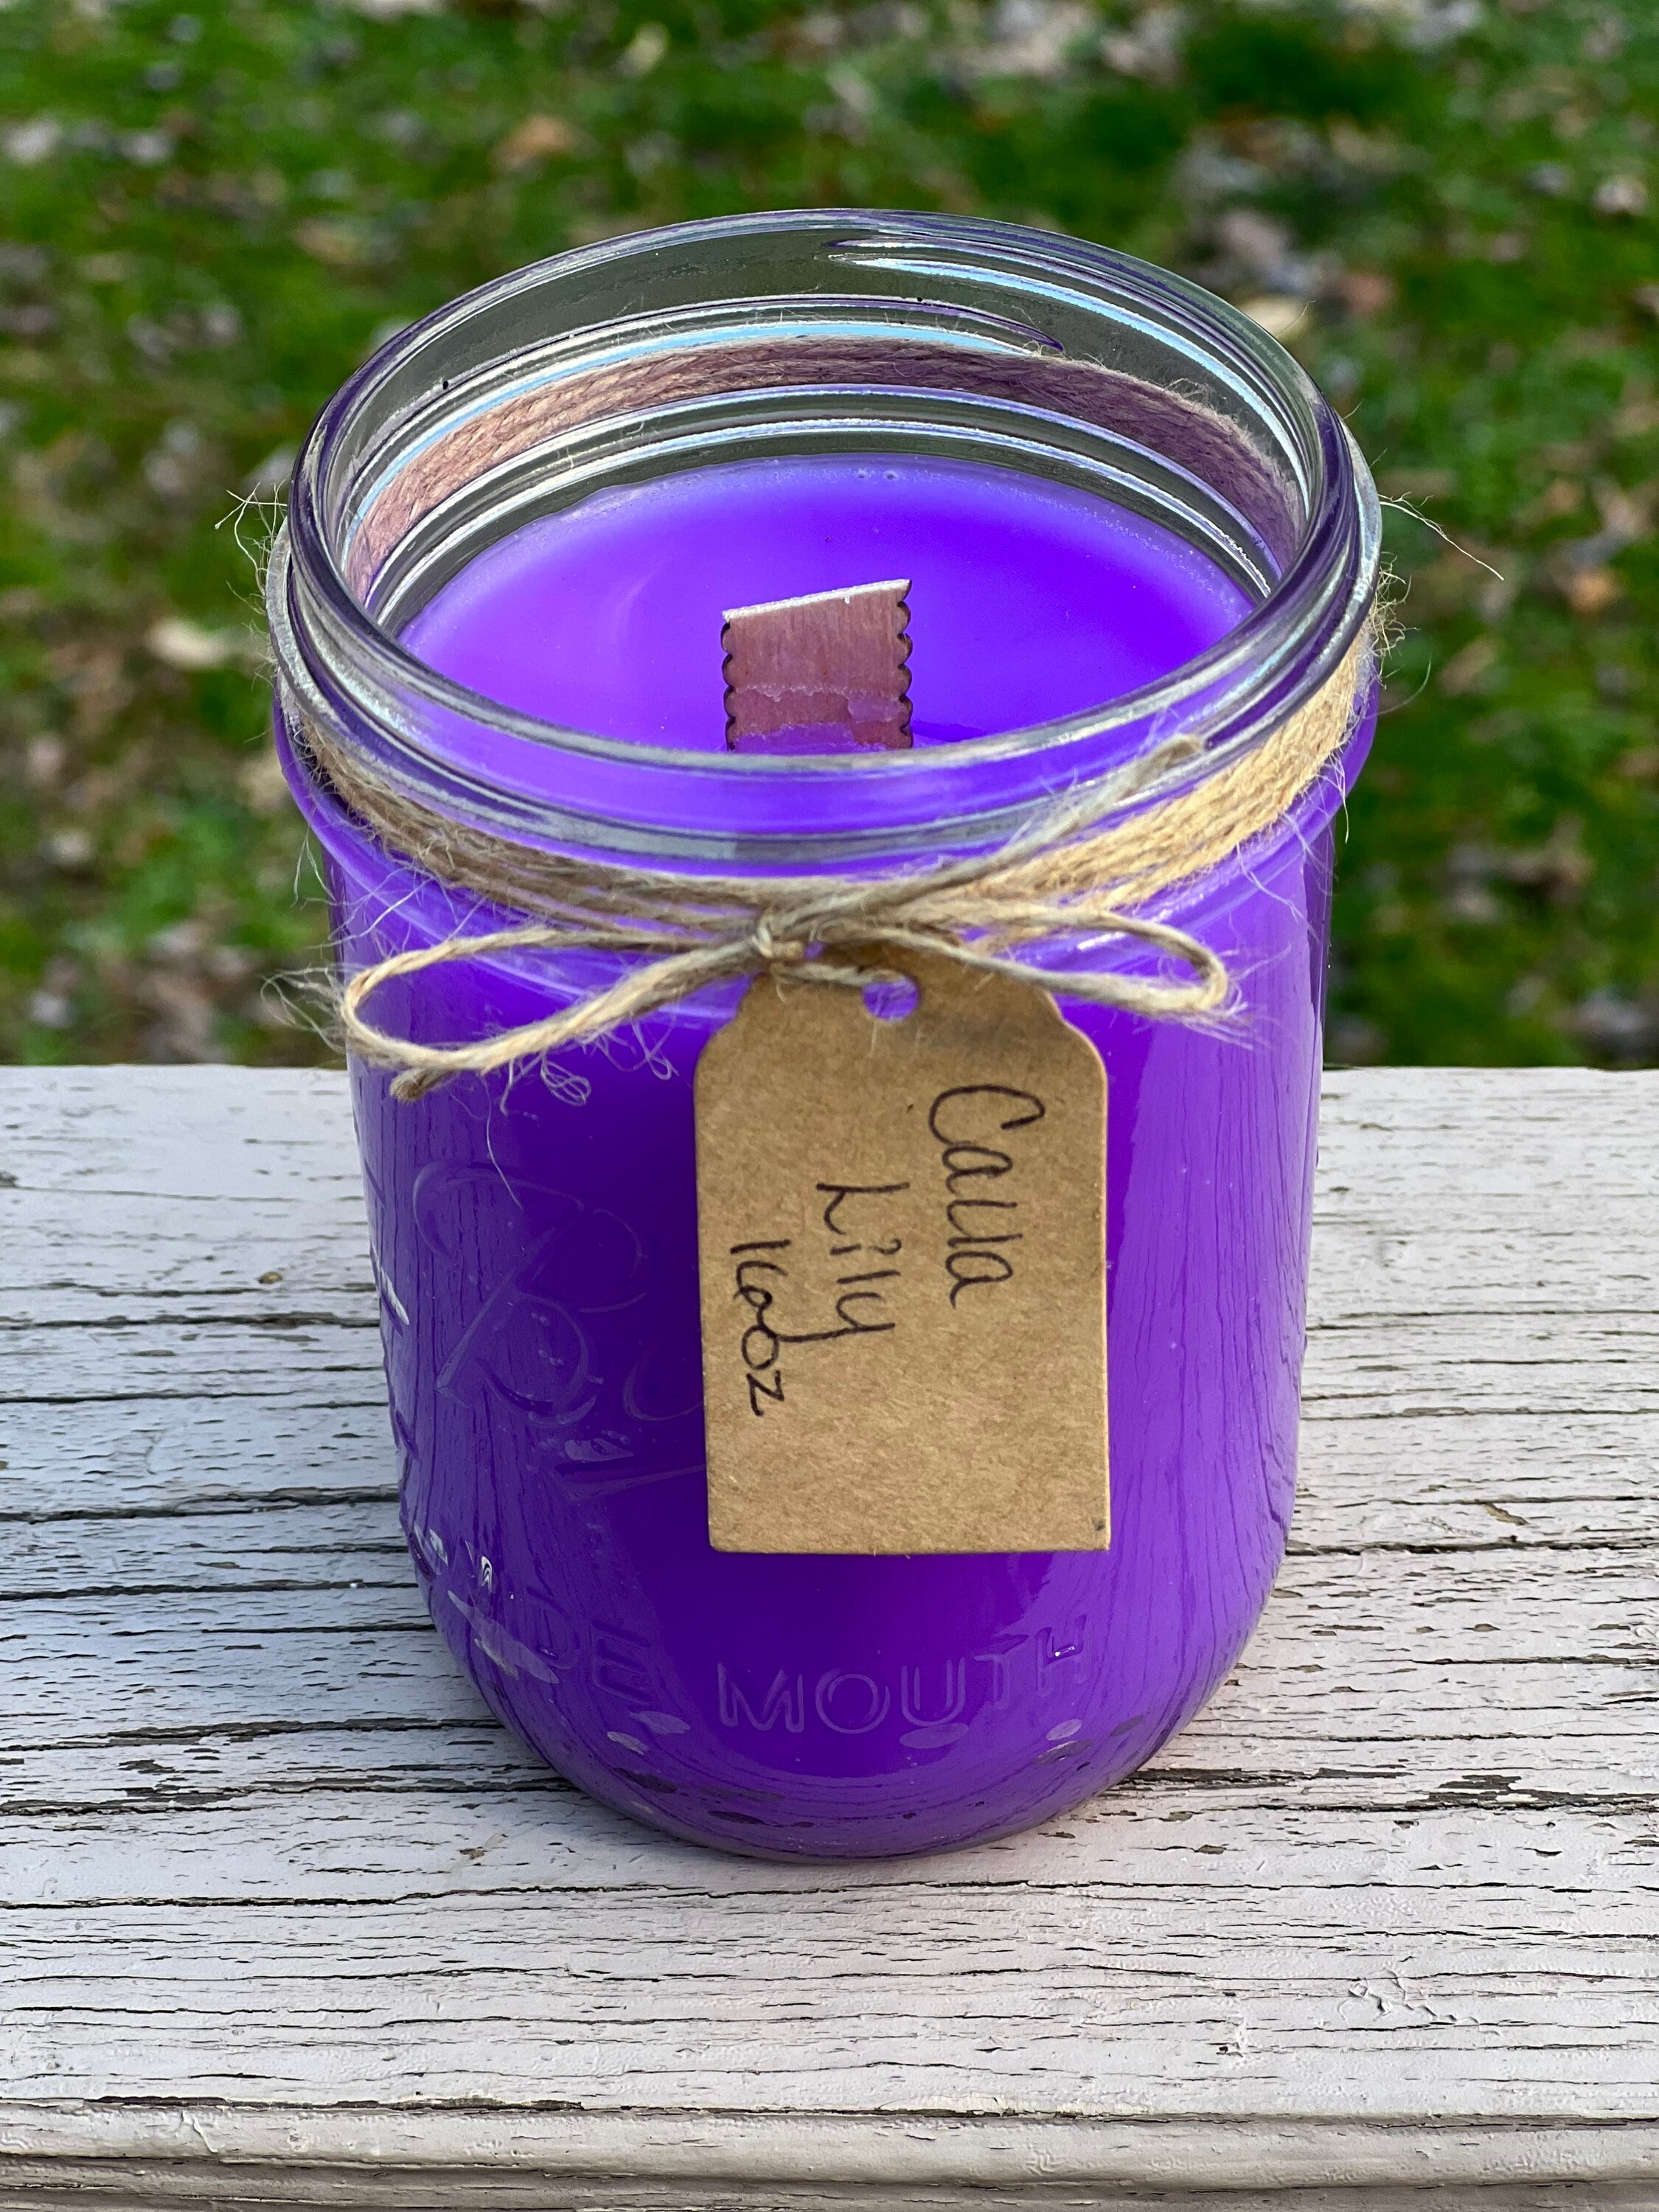 Dual Wick Assistant - DUAL Candle Wick Holder For Homemade Candles using  Mason Jars!